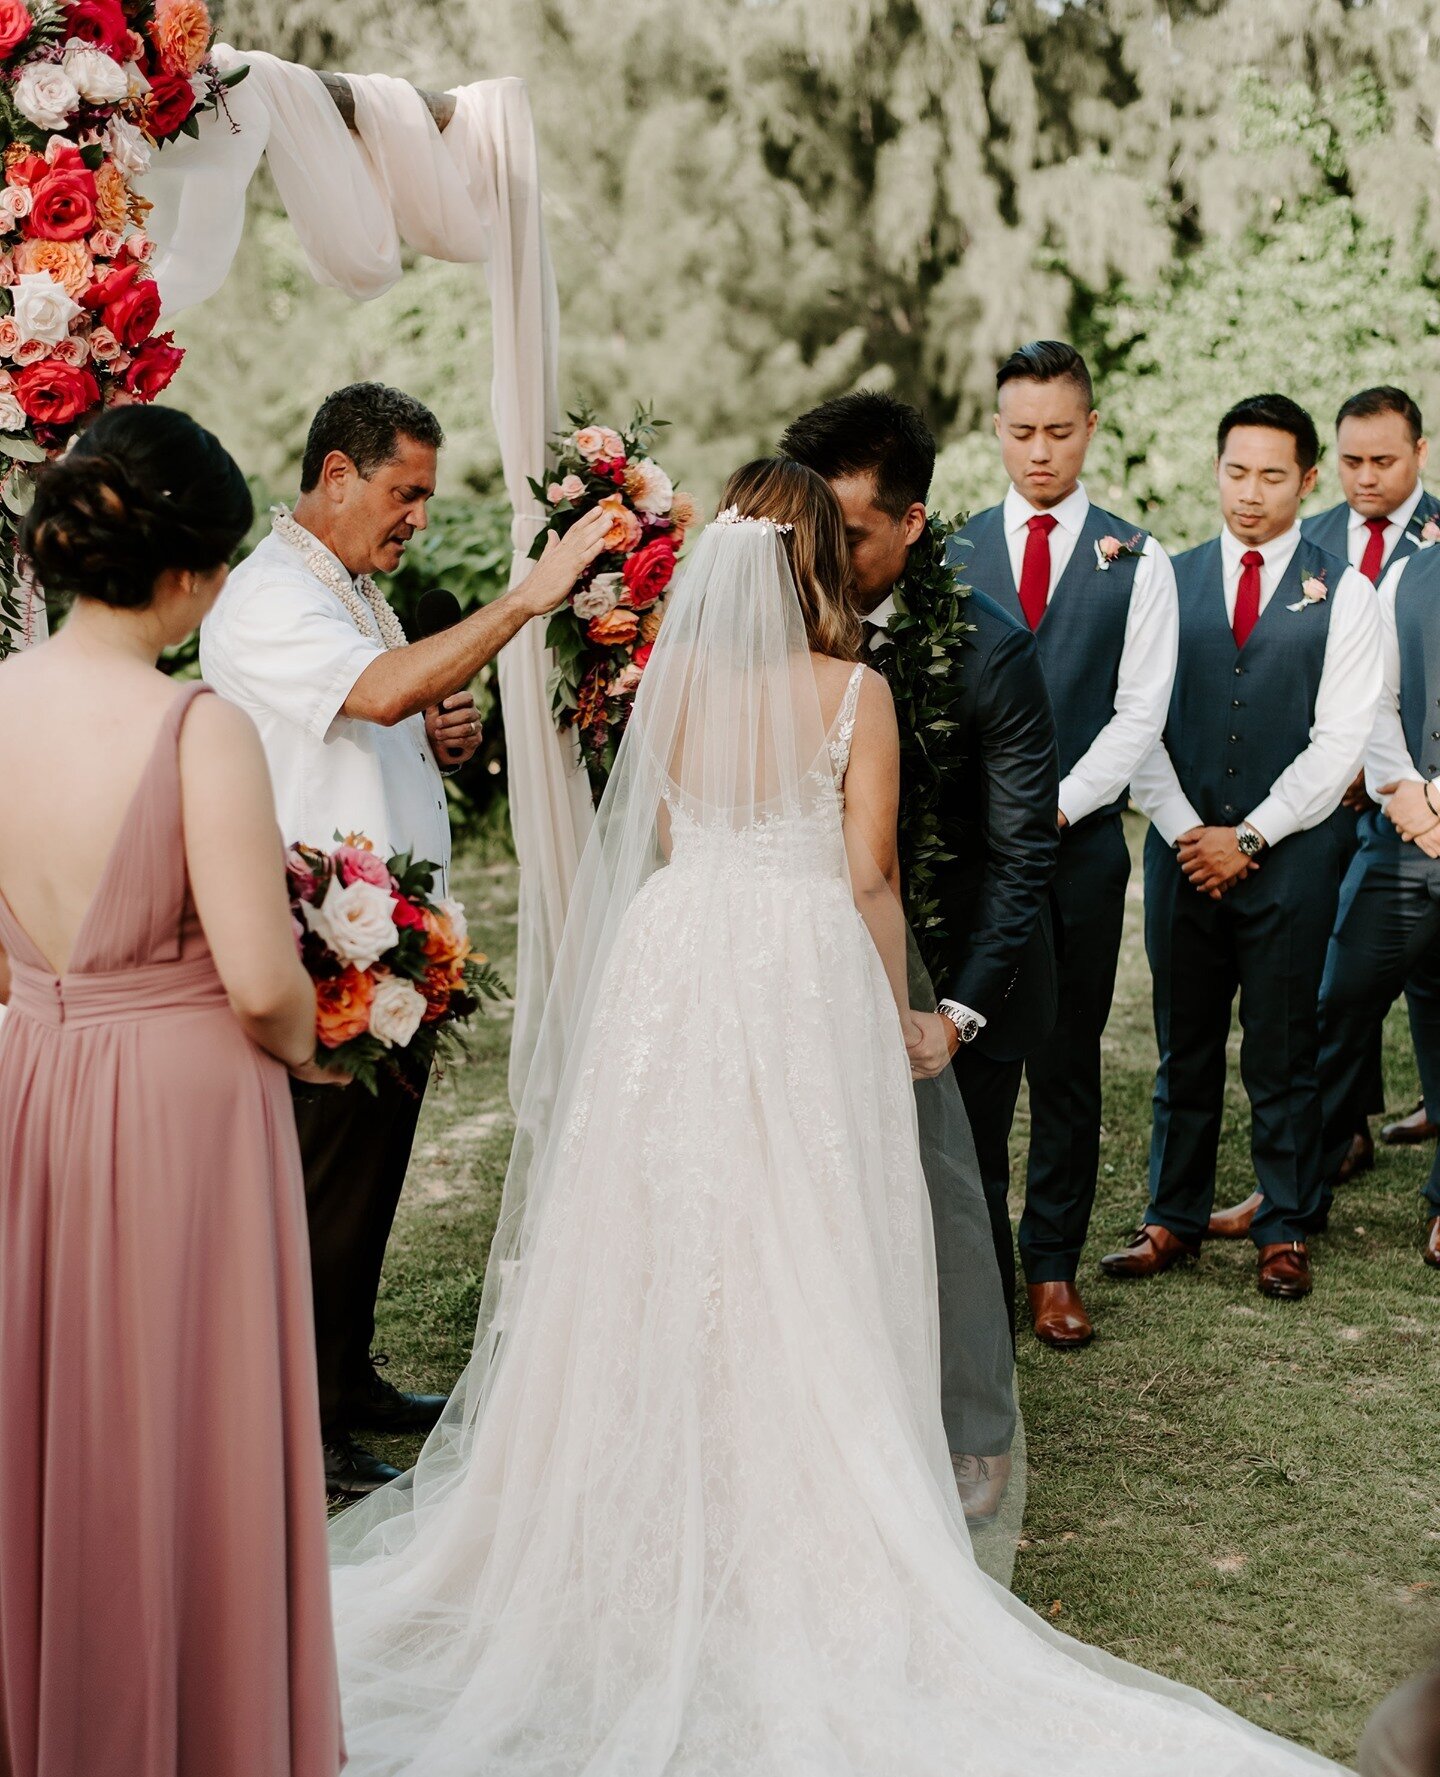 There are many special Hawaiian traditions to consider incorporating into your Hawaii wedding. One that I find especially beautiful is Ha, the breath of life. ⁠
⁠
This exchange of breath is done when the couple press together the bridge of their nose